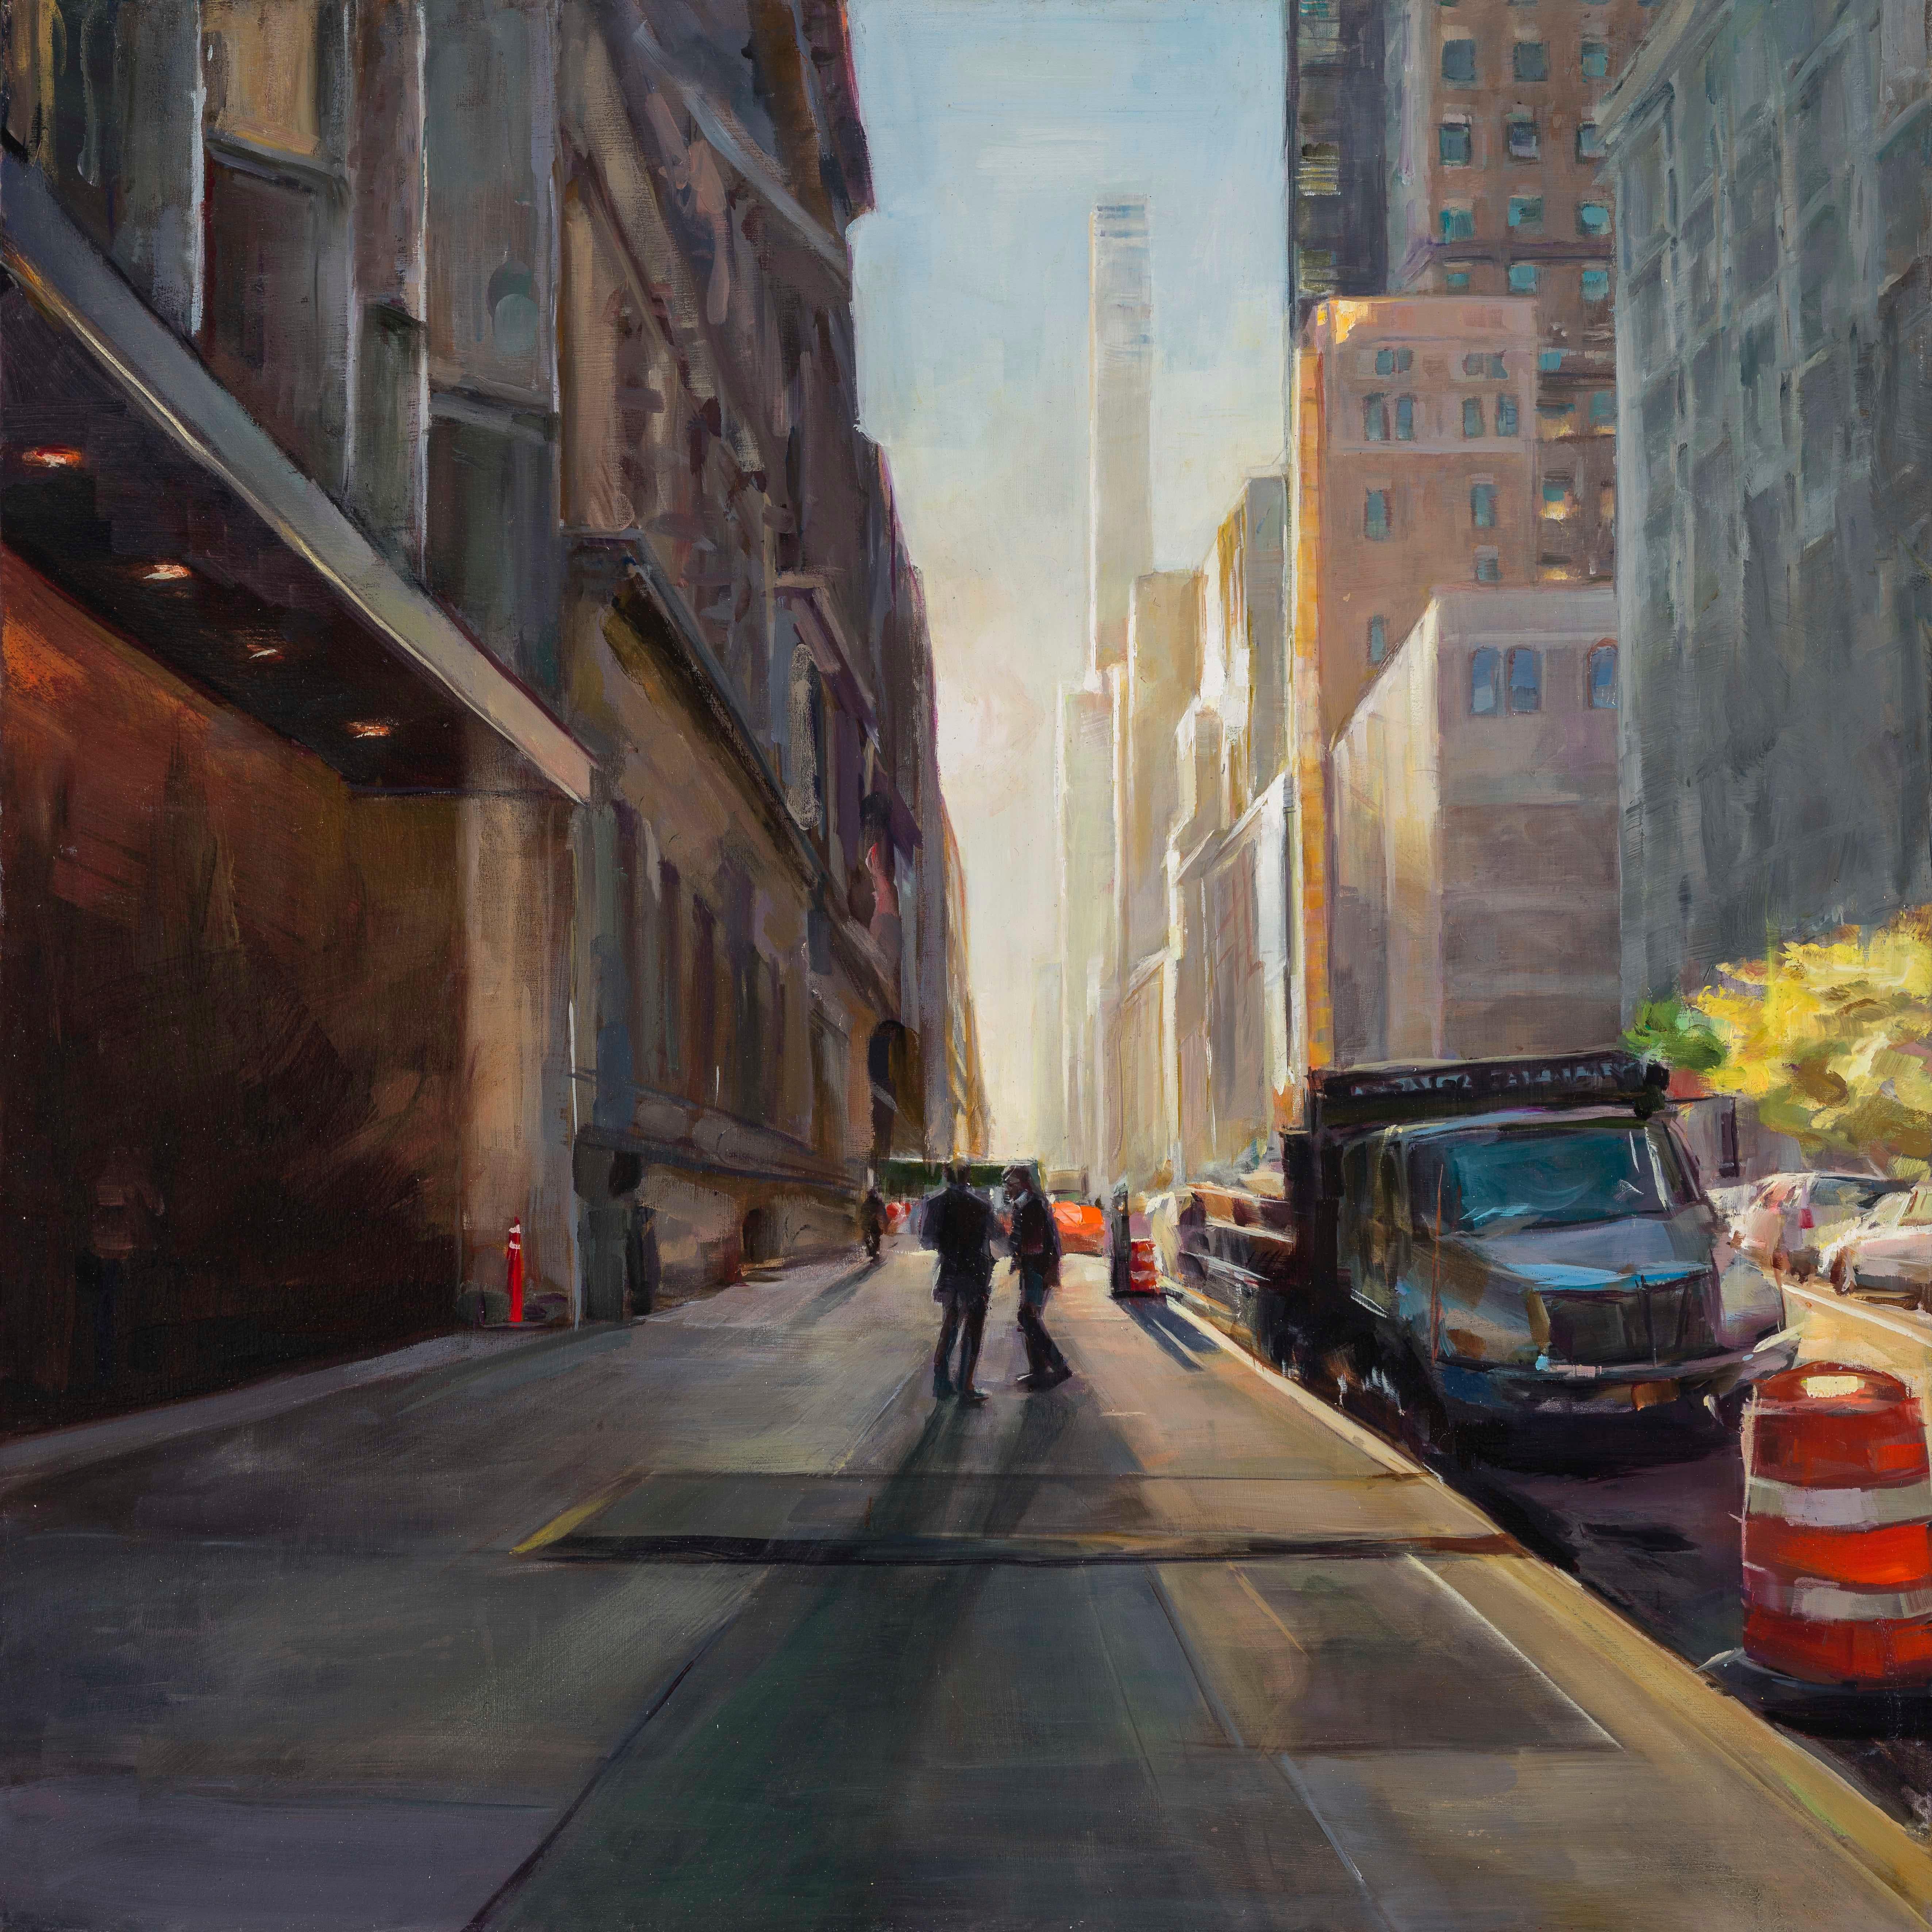 Figures on Sidewalk in Morning - Painting by Kathryn Maher